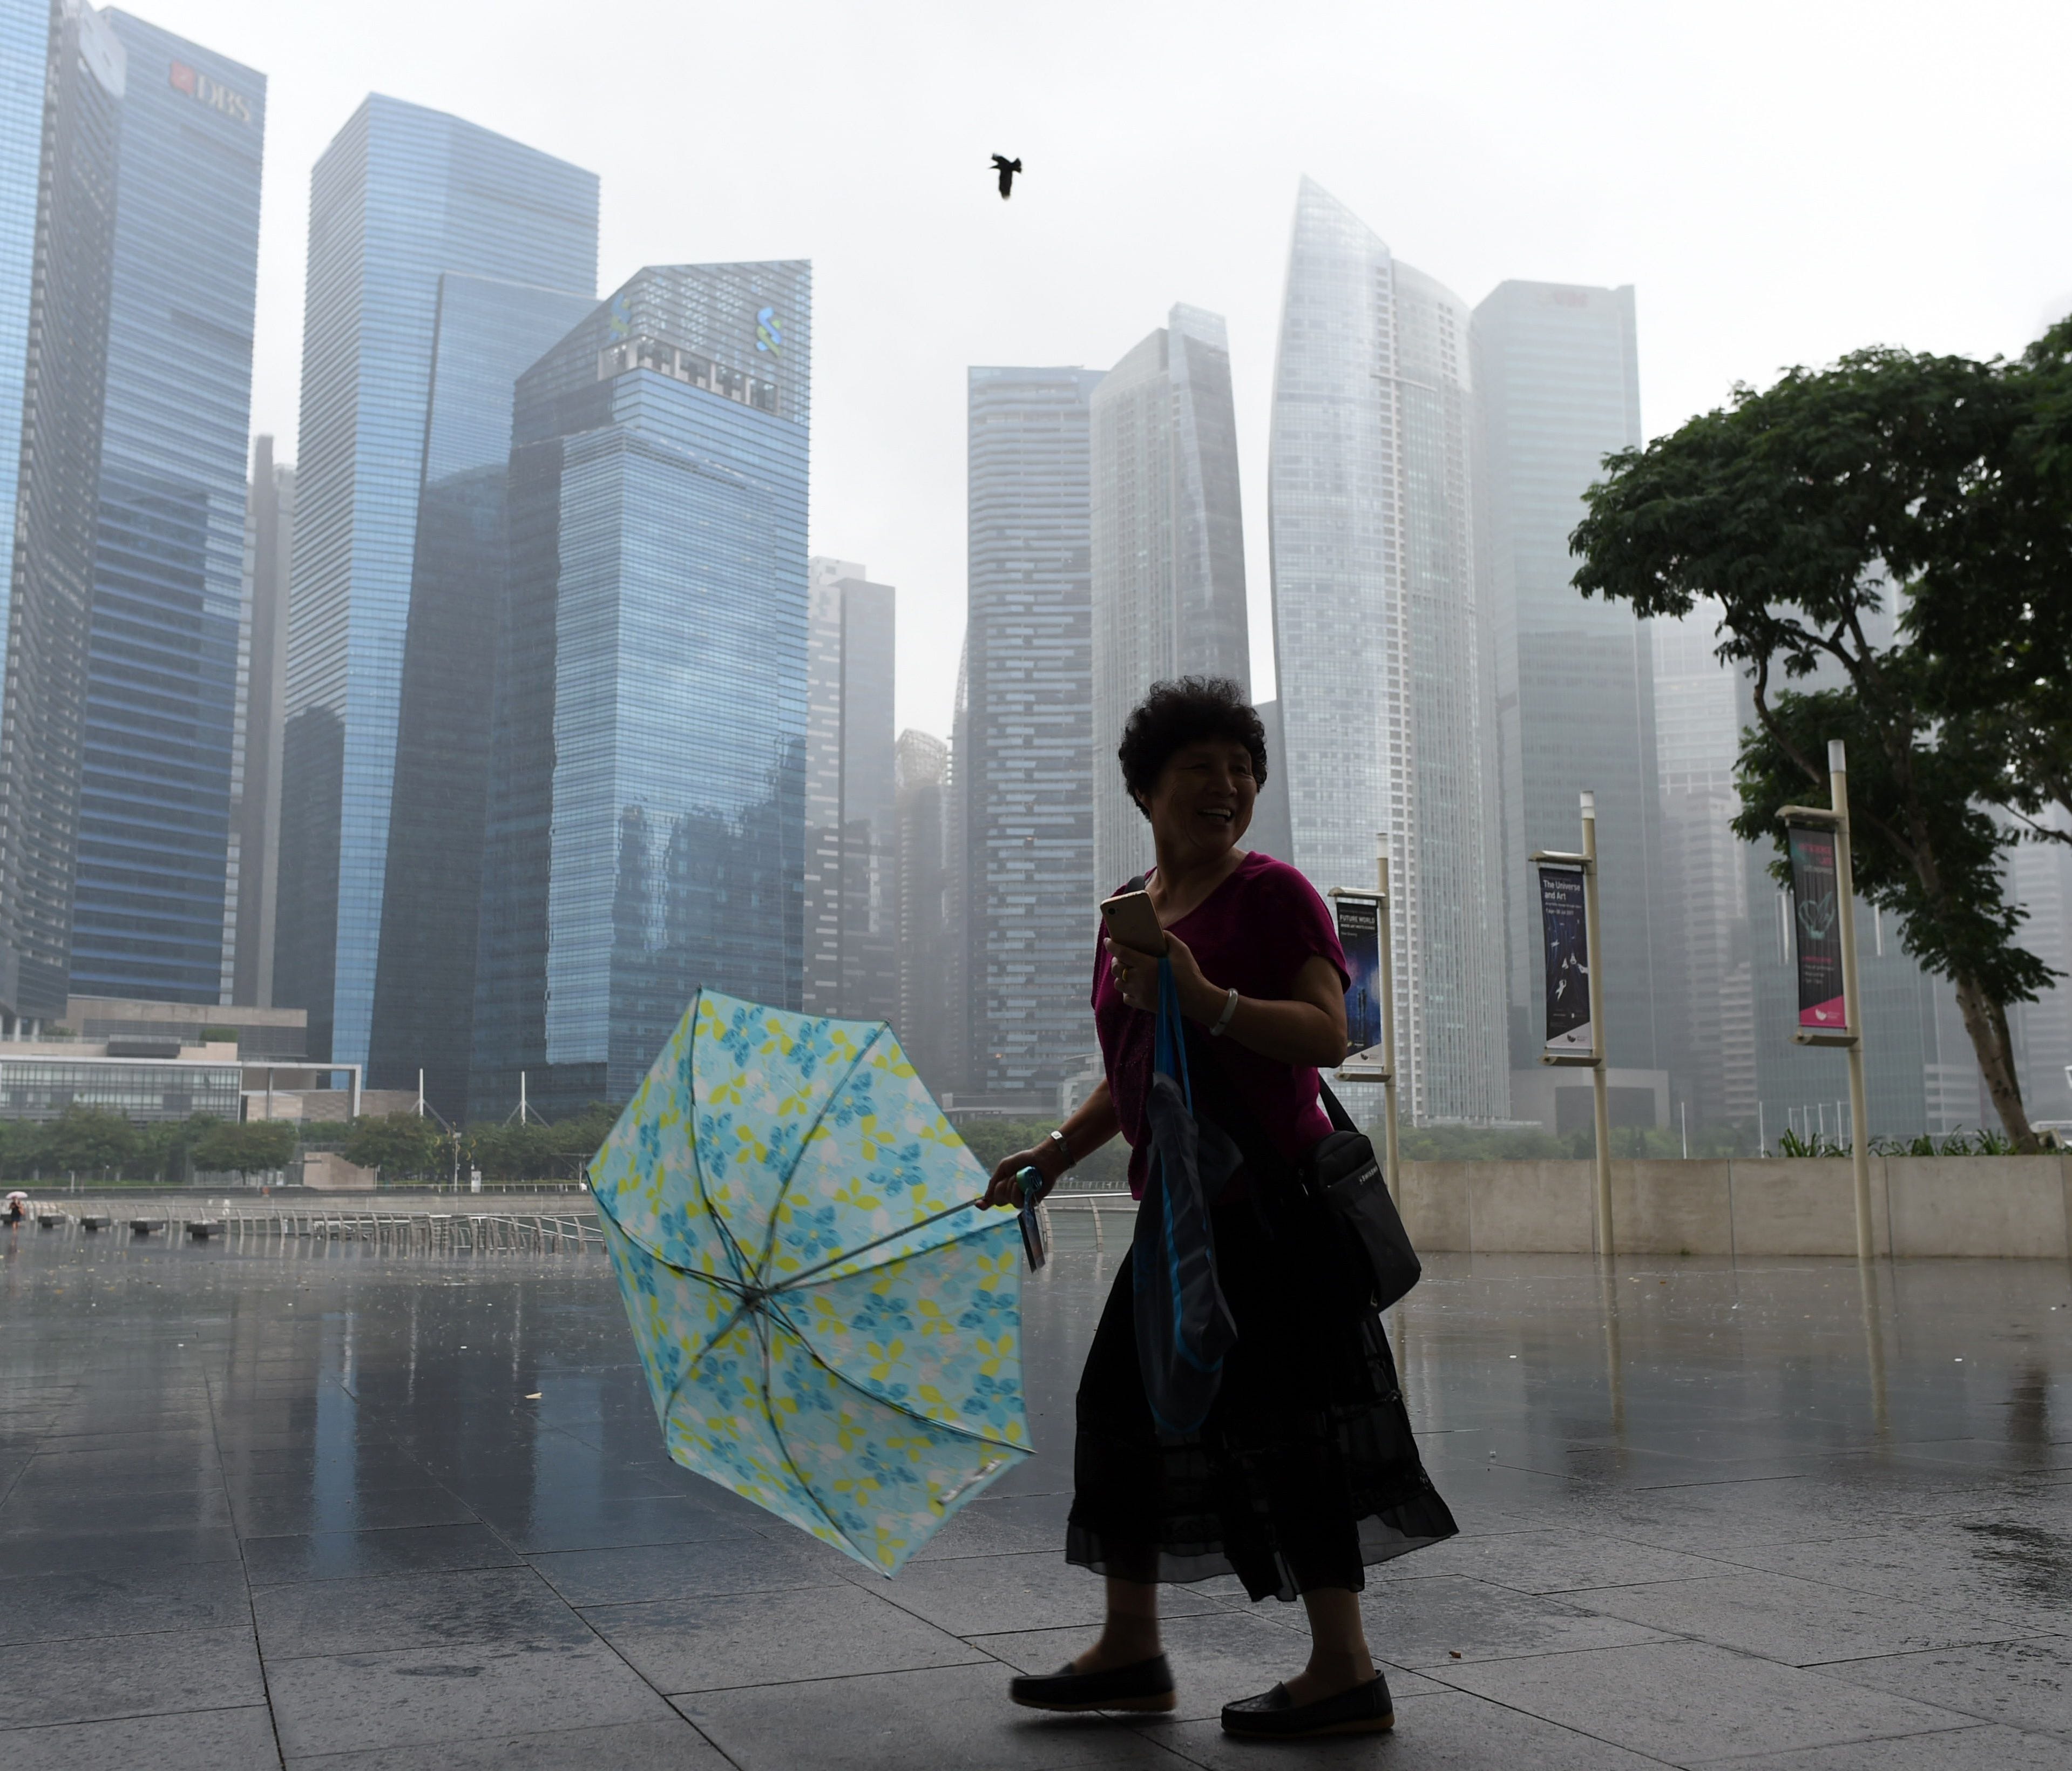 A woman with an umbrella walks away from the rain in Singapore on March 30, 2017.